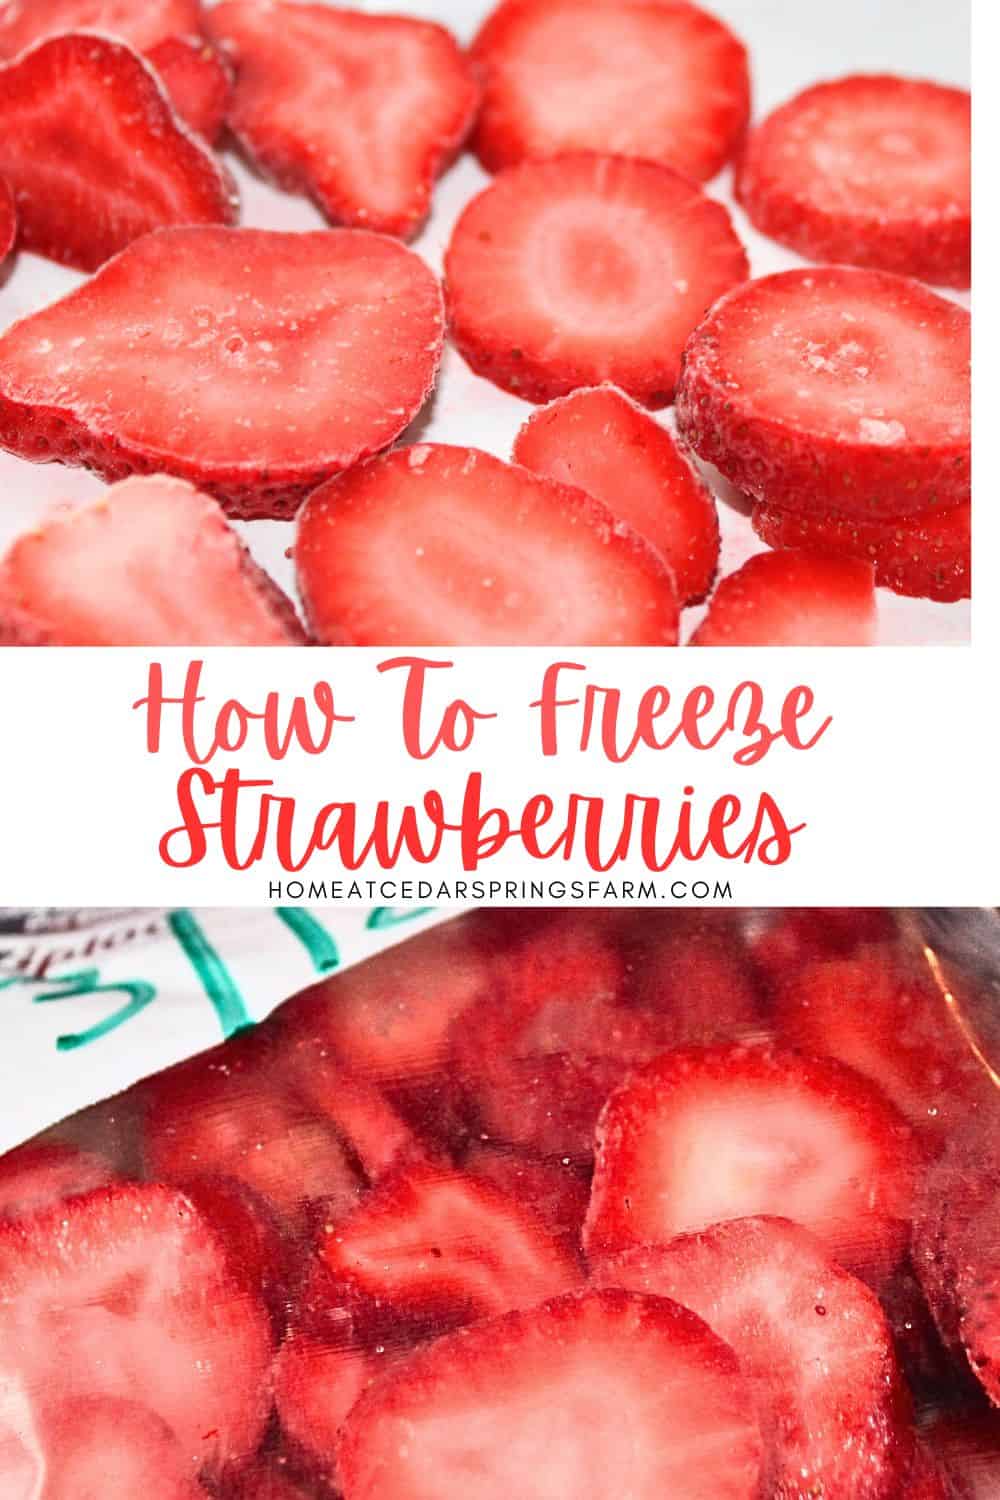 Sliced frozen strawberries on a tray and in a bag with text overlay.